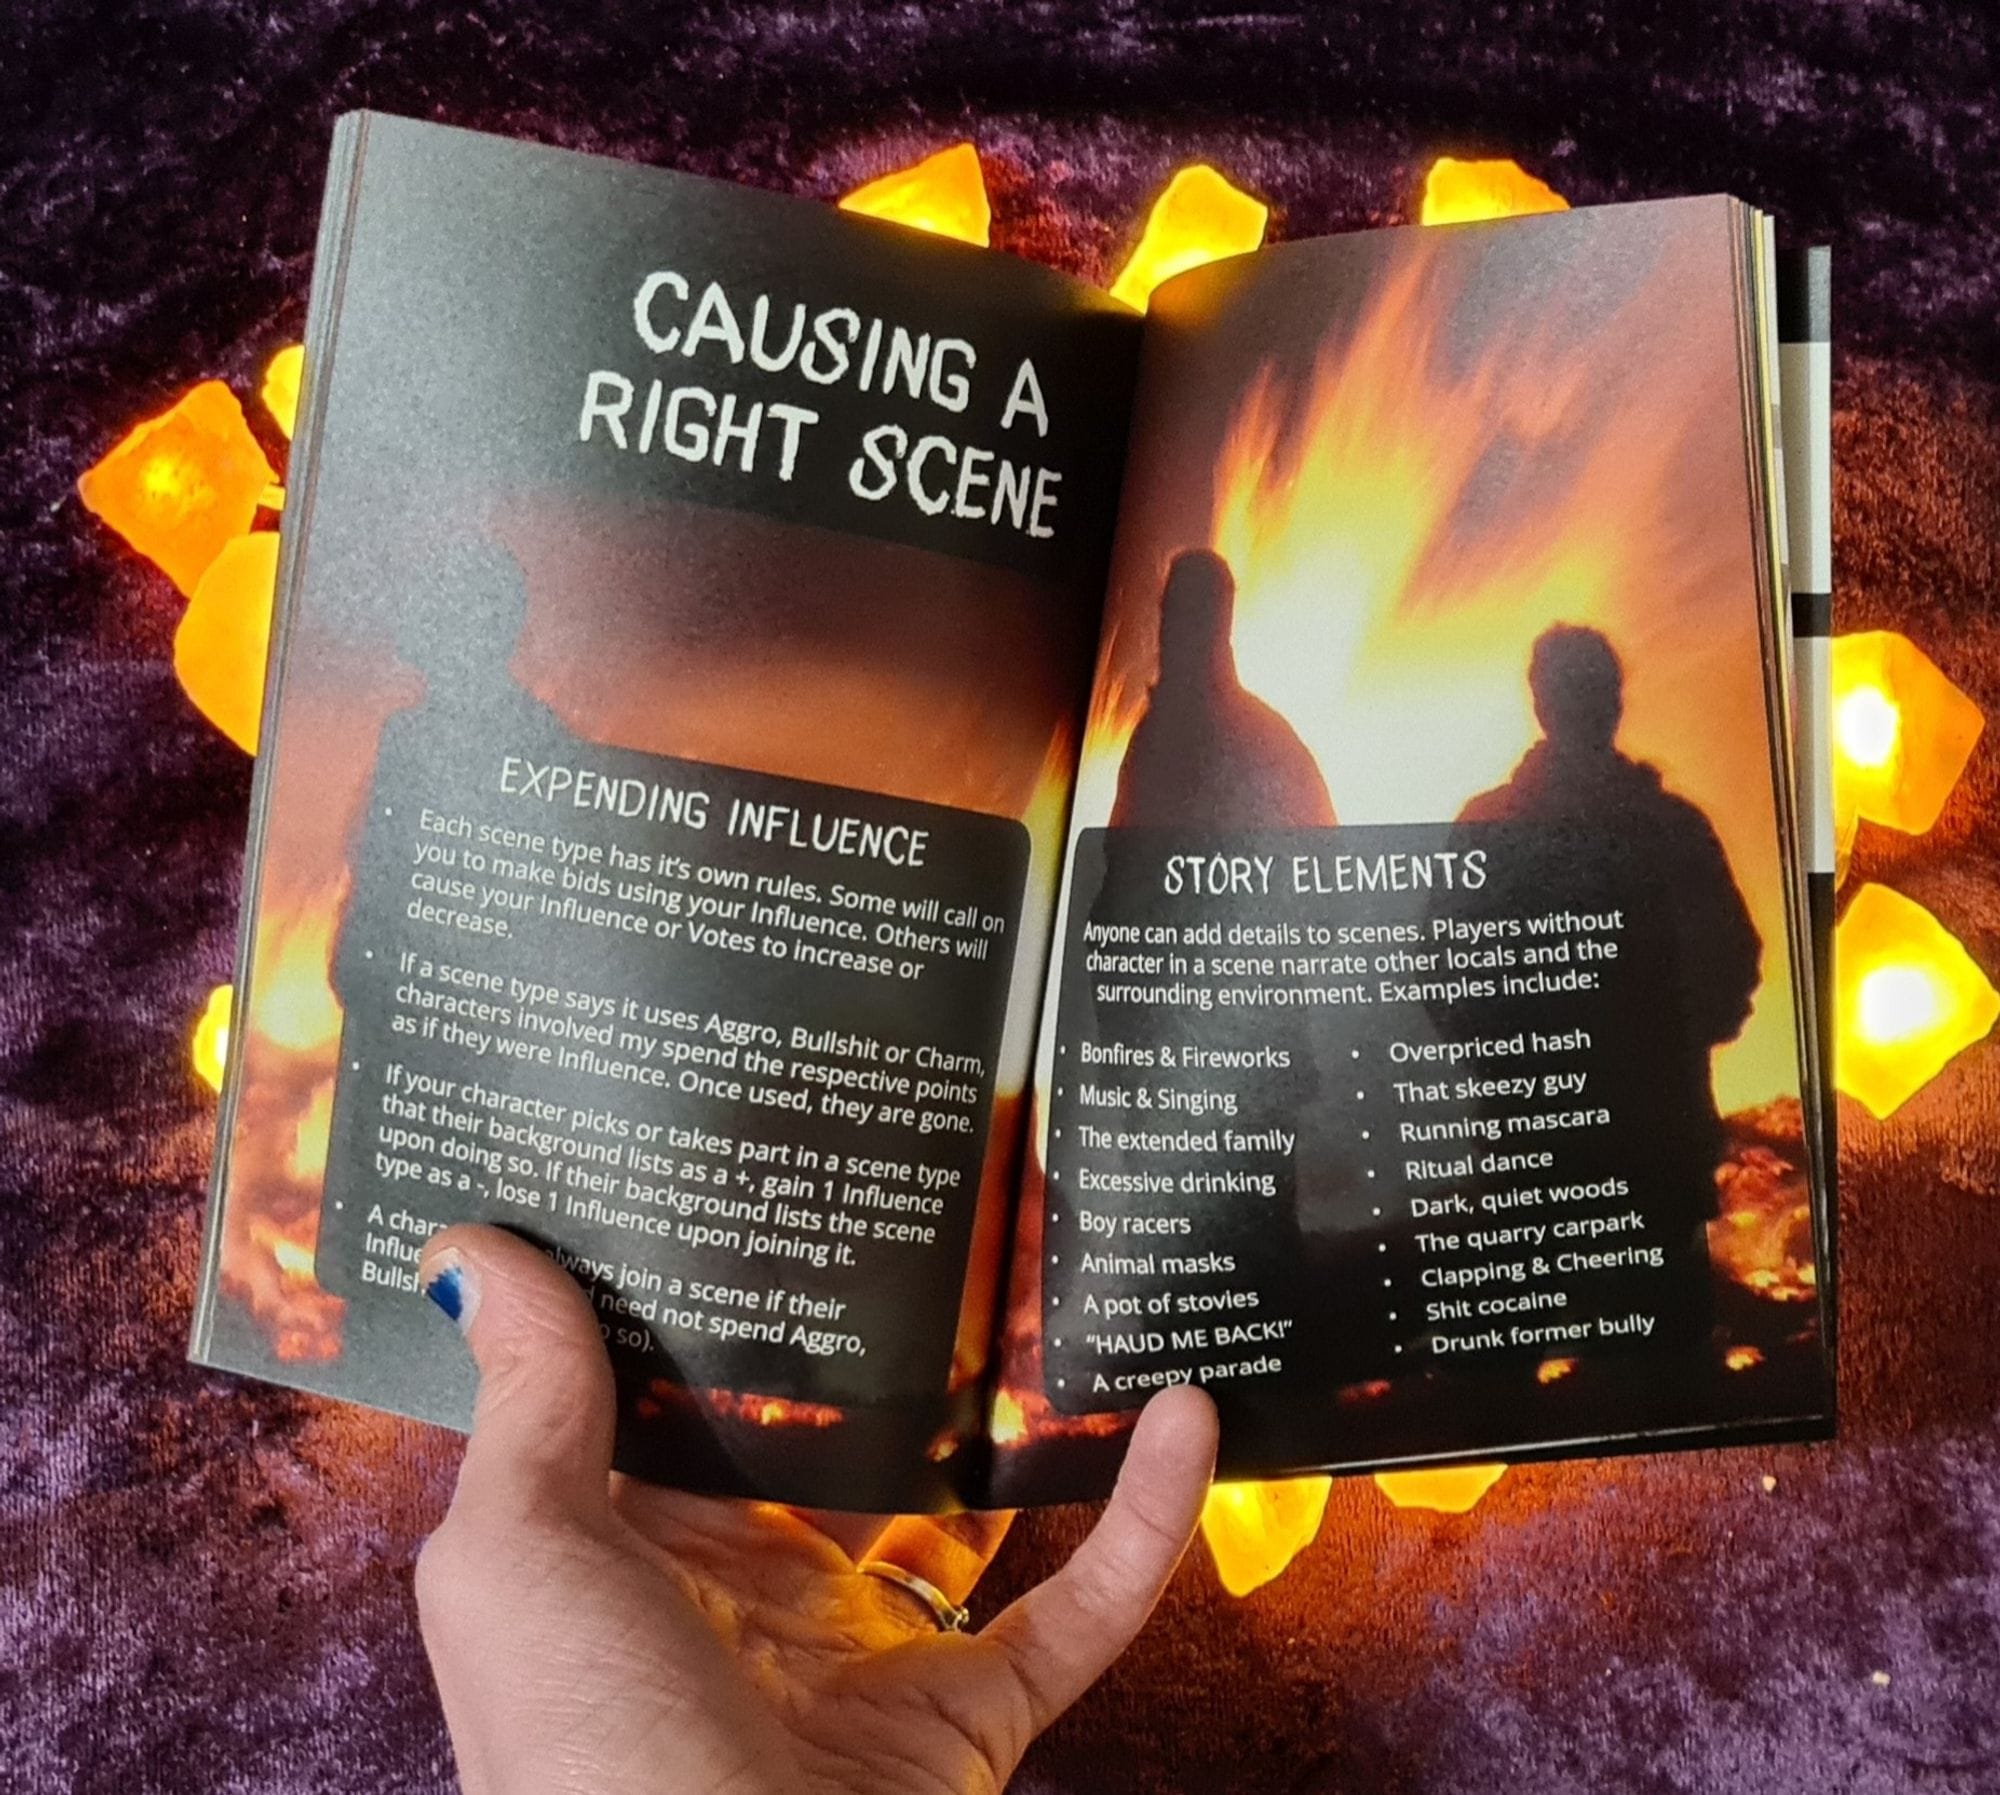 The same background as the book appears on above, but with a hand holding open the pages from below. The spread shows a grainy image of sillowtted people in front of a raging fire. Text boxes over the top describe how scenes are handled.